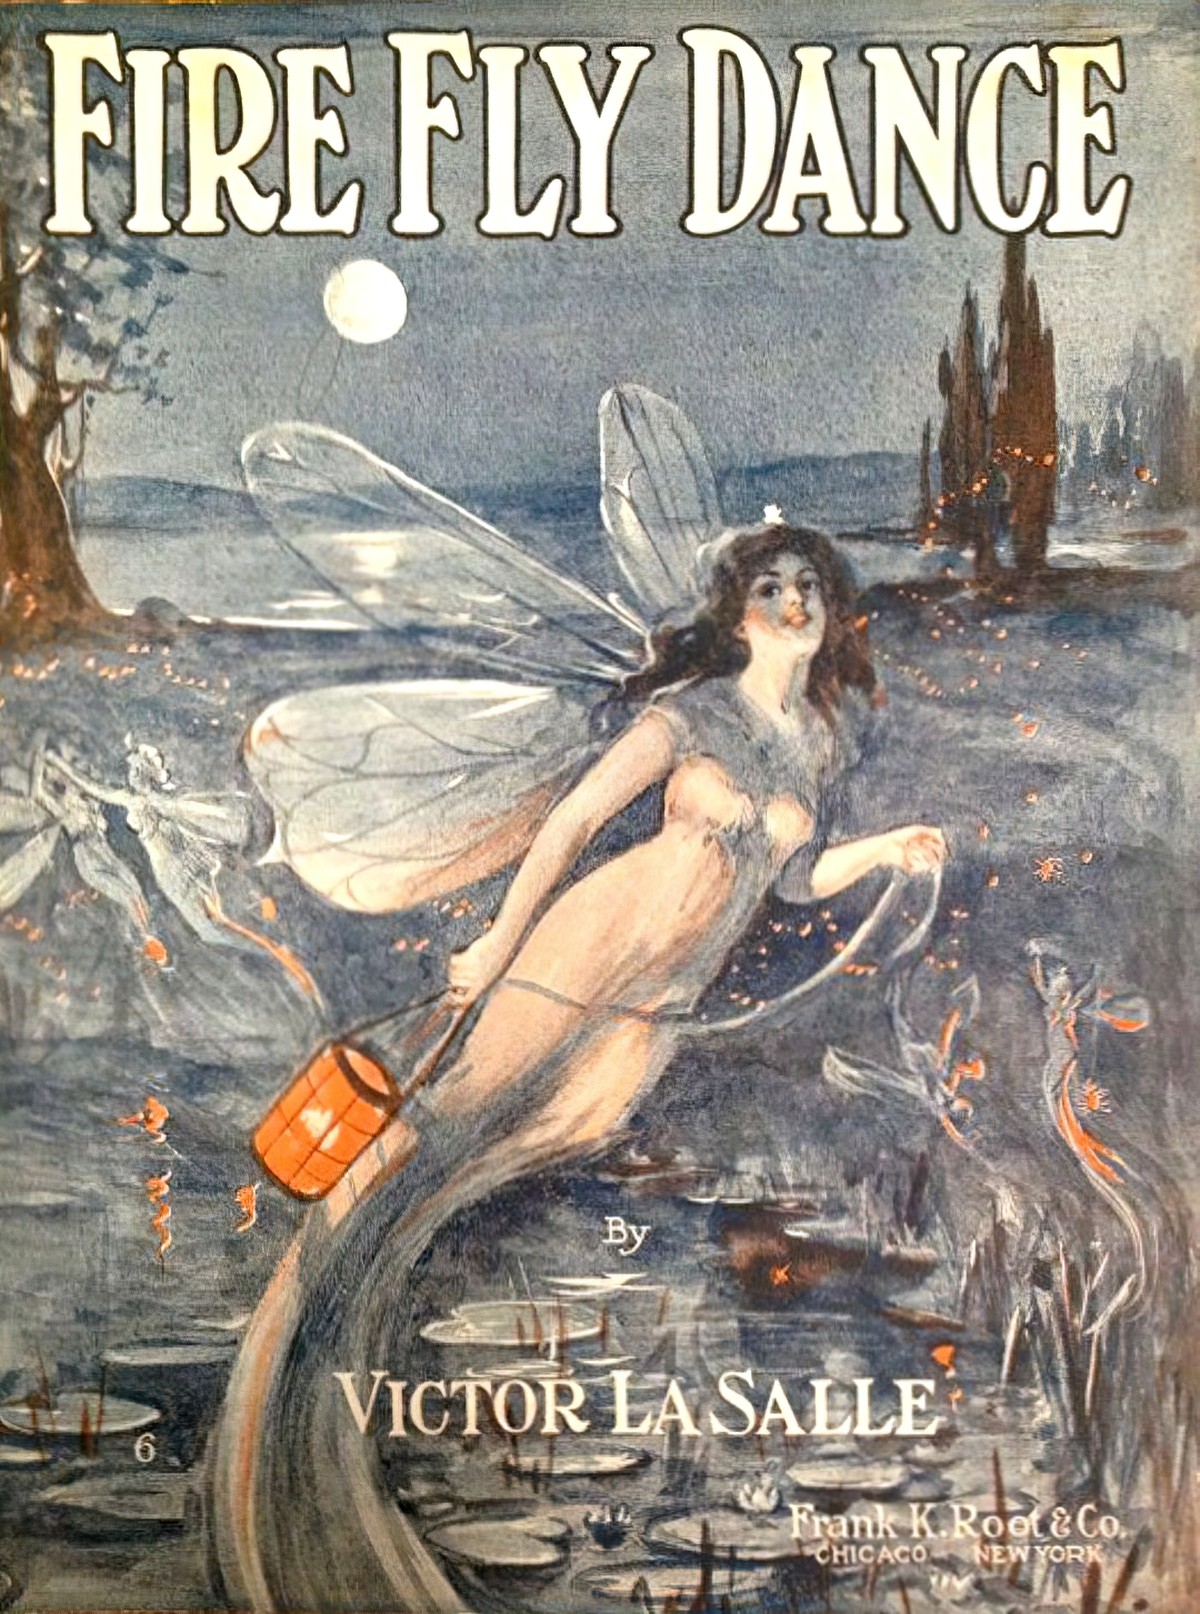 Fire Fly Dance Sheet Music cover, early 1900s